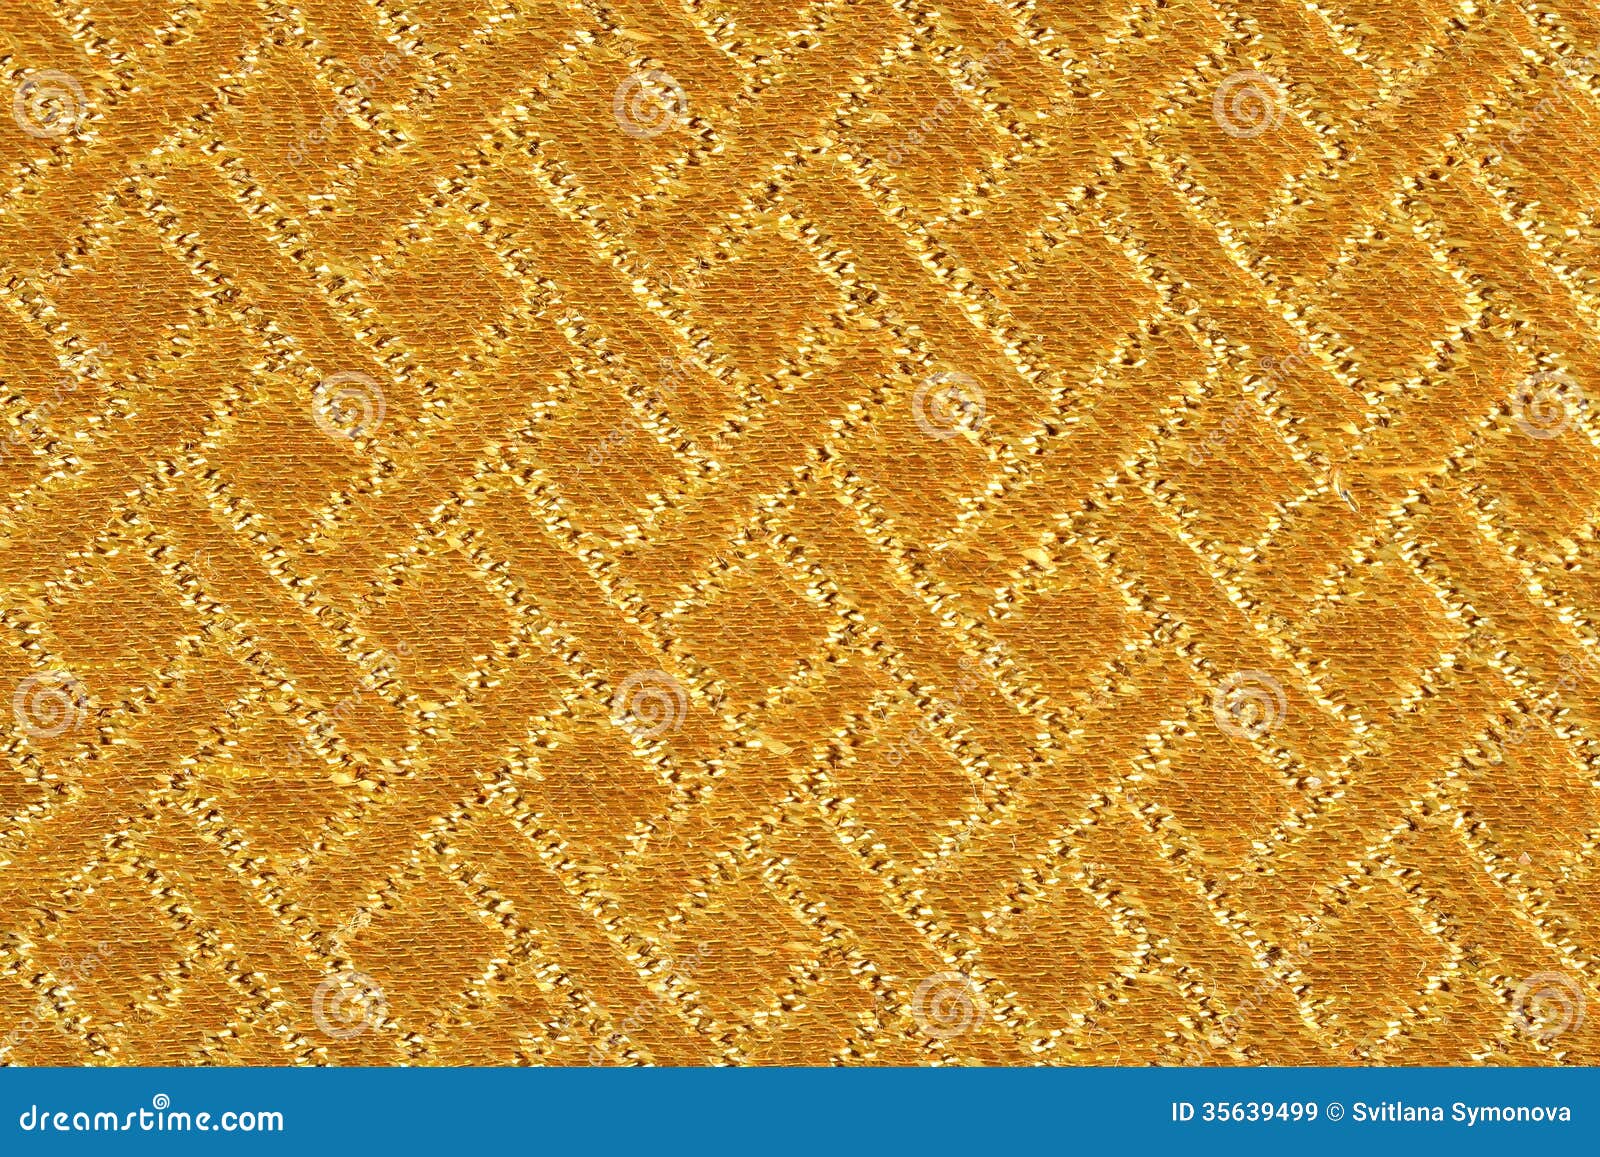 Golden fabric texture stock image. Image of backdrop - 35639499